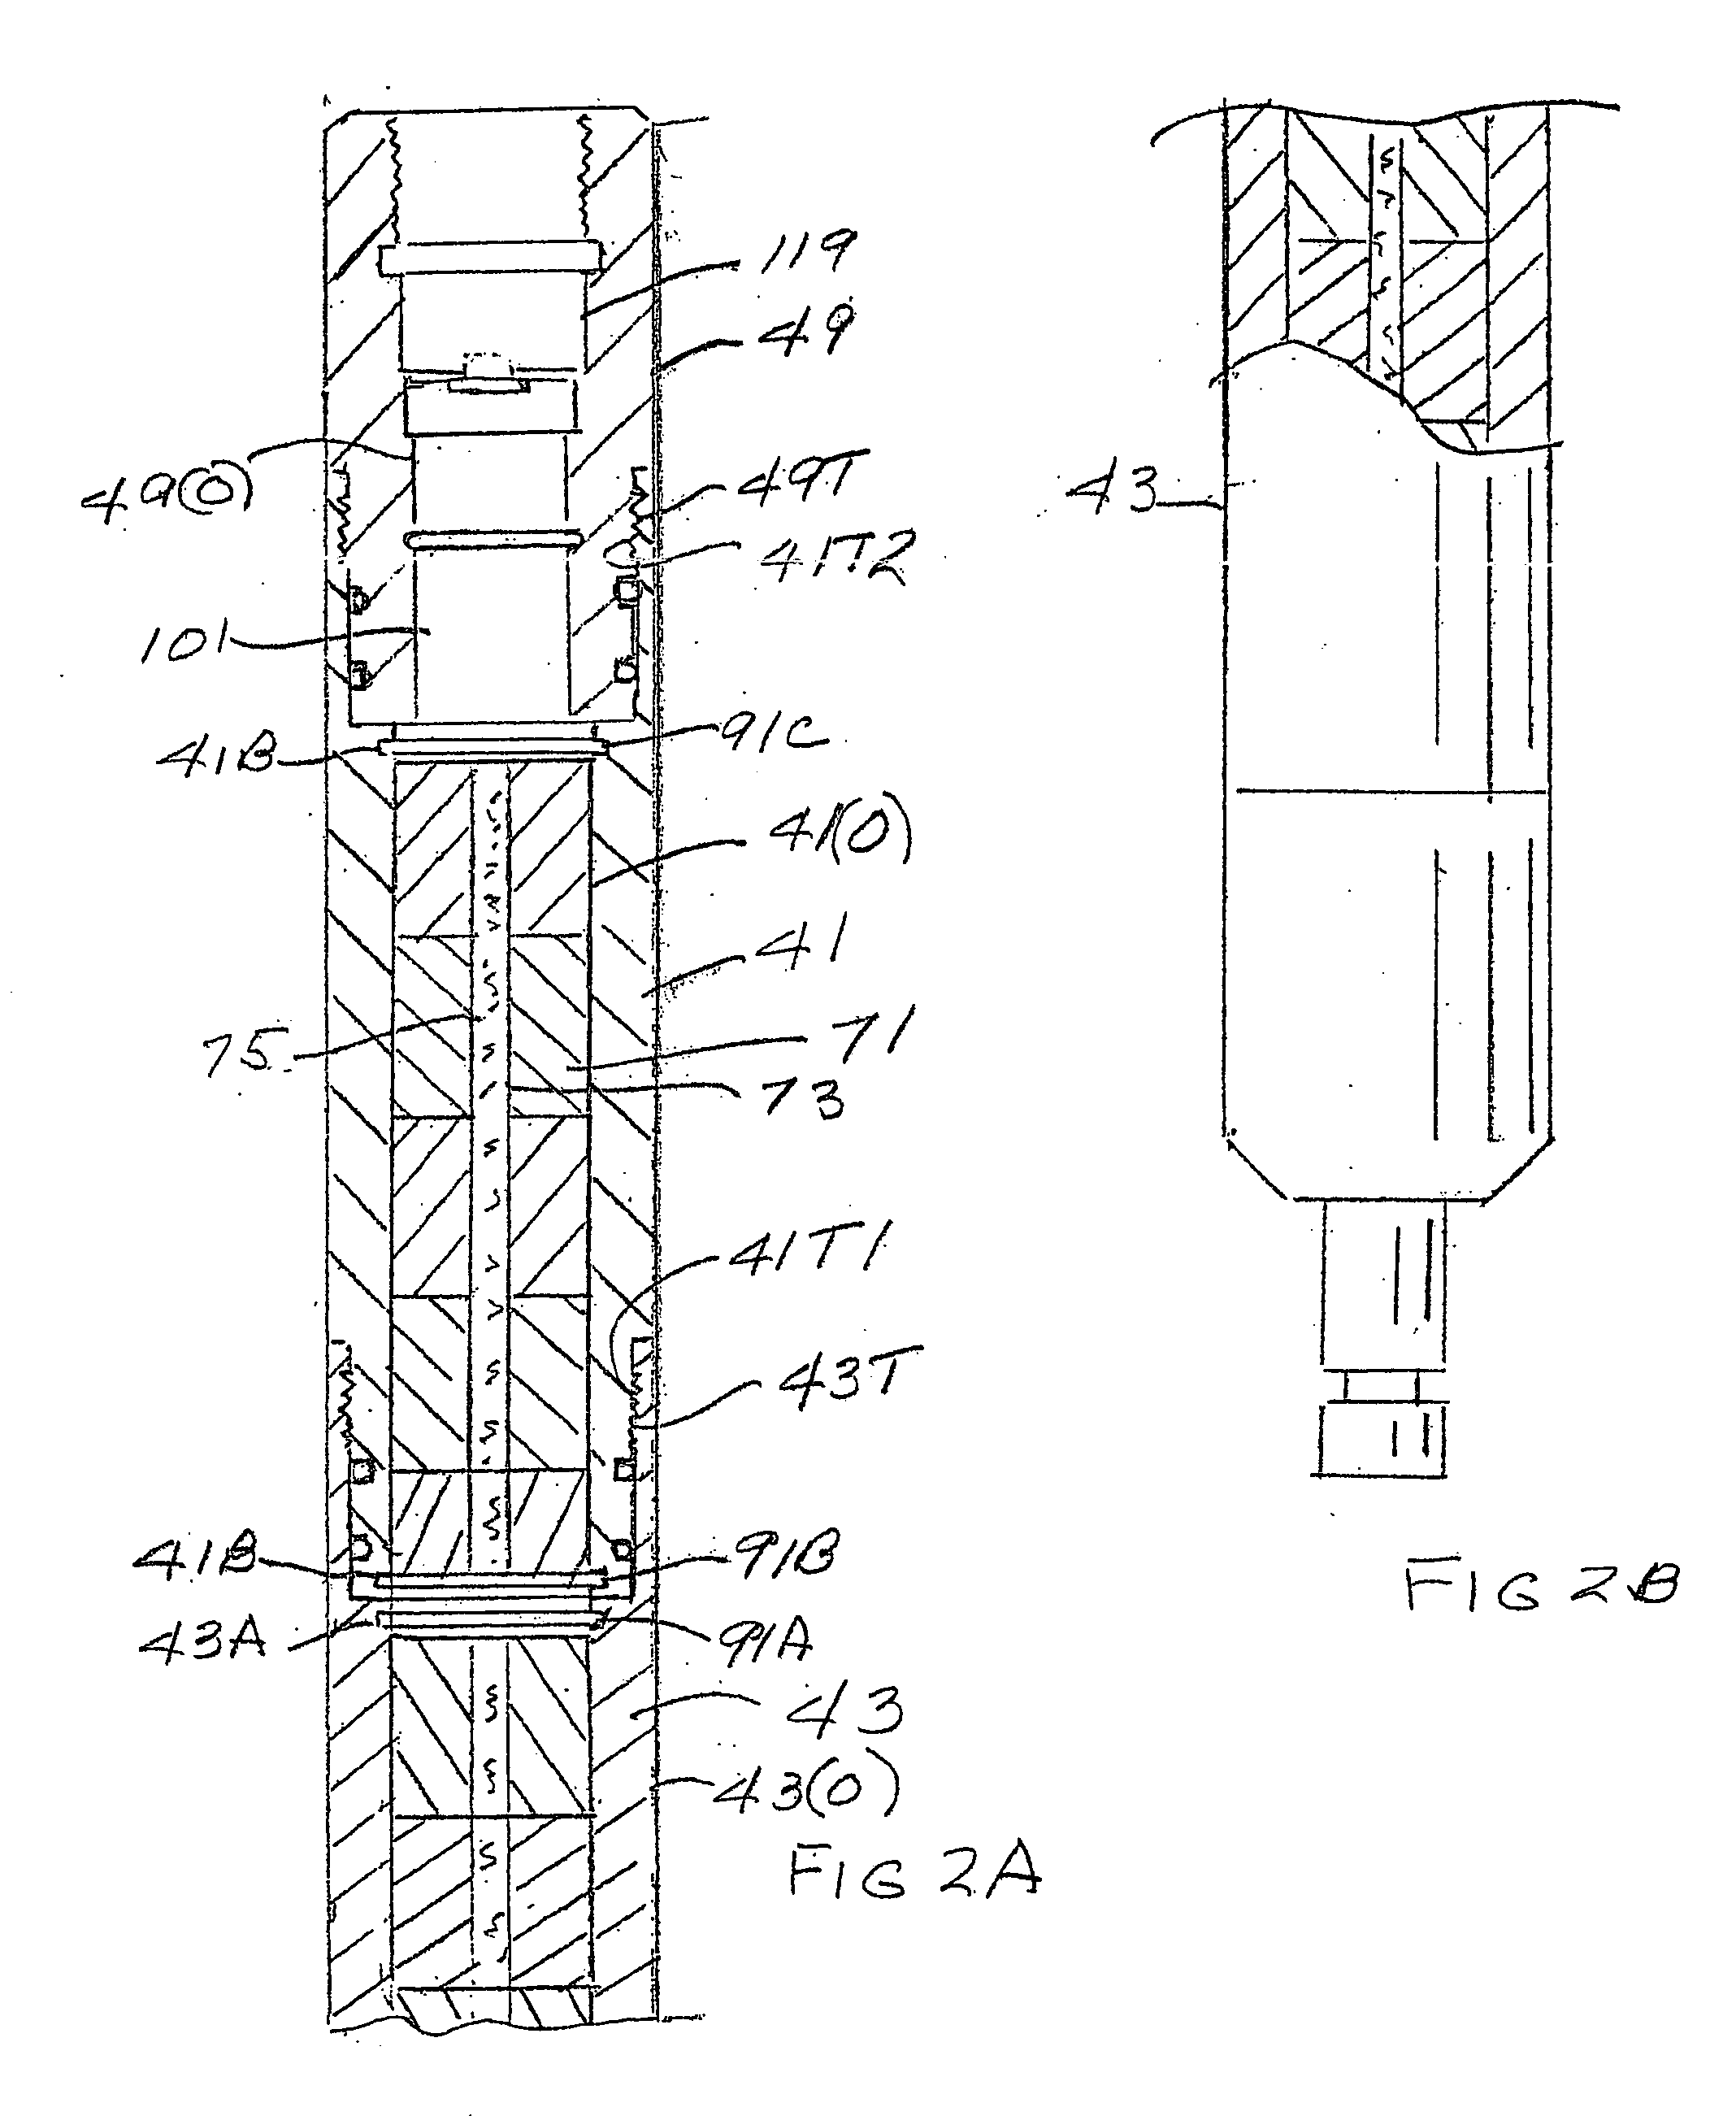 Thermal generator for downhole tools